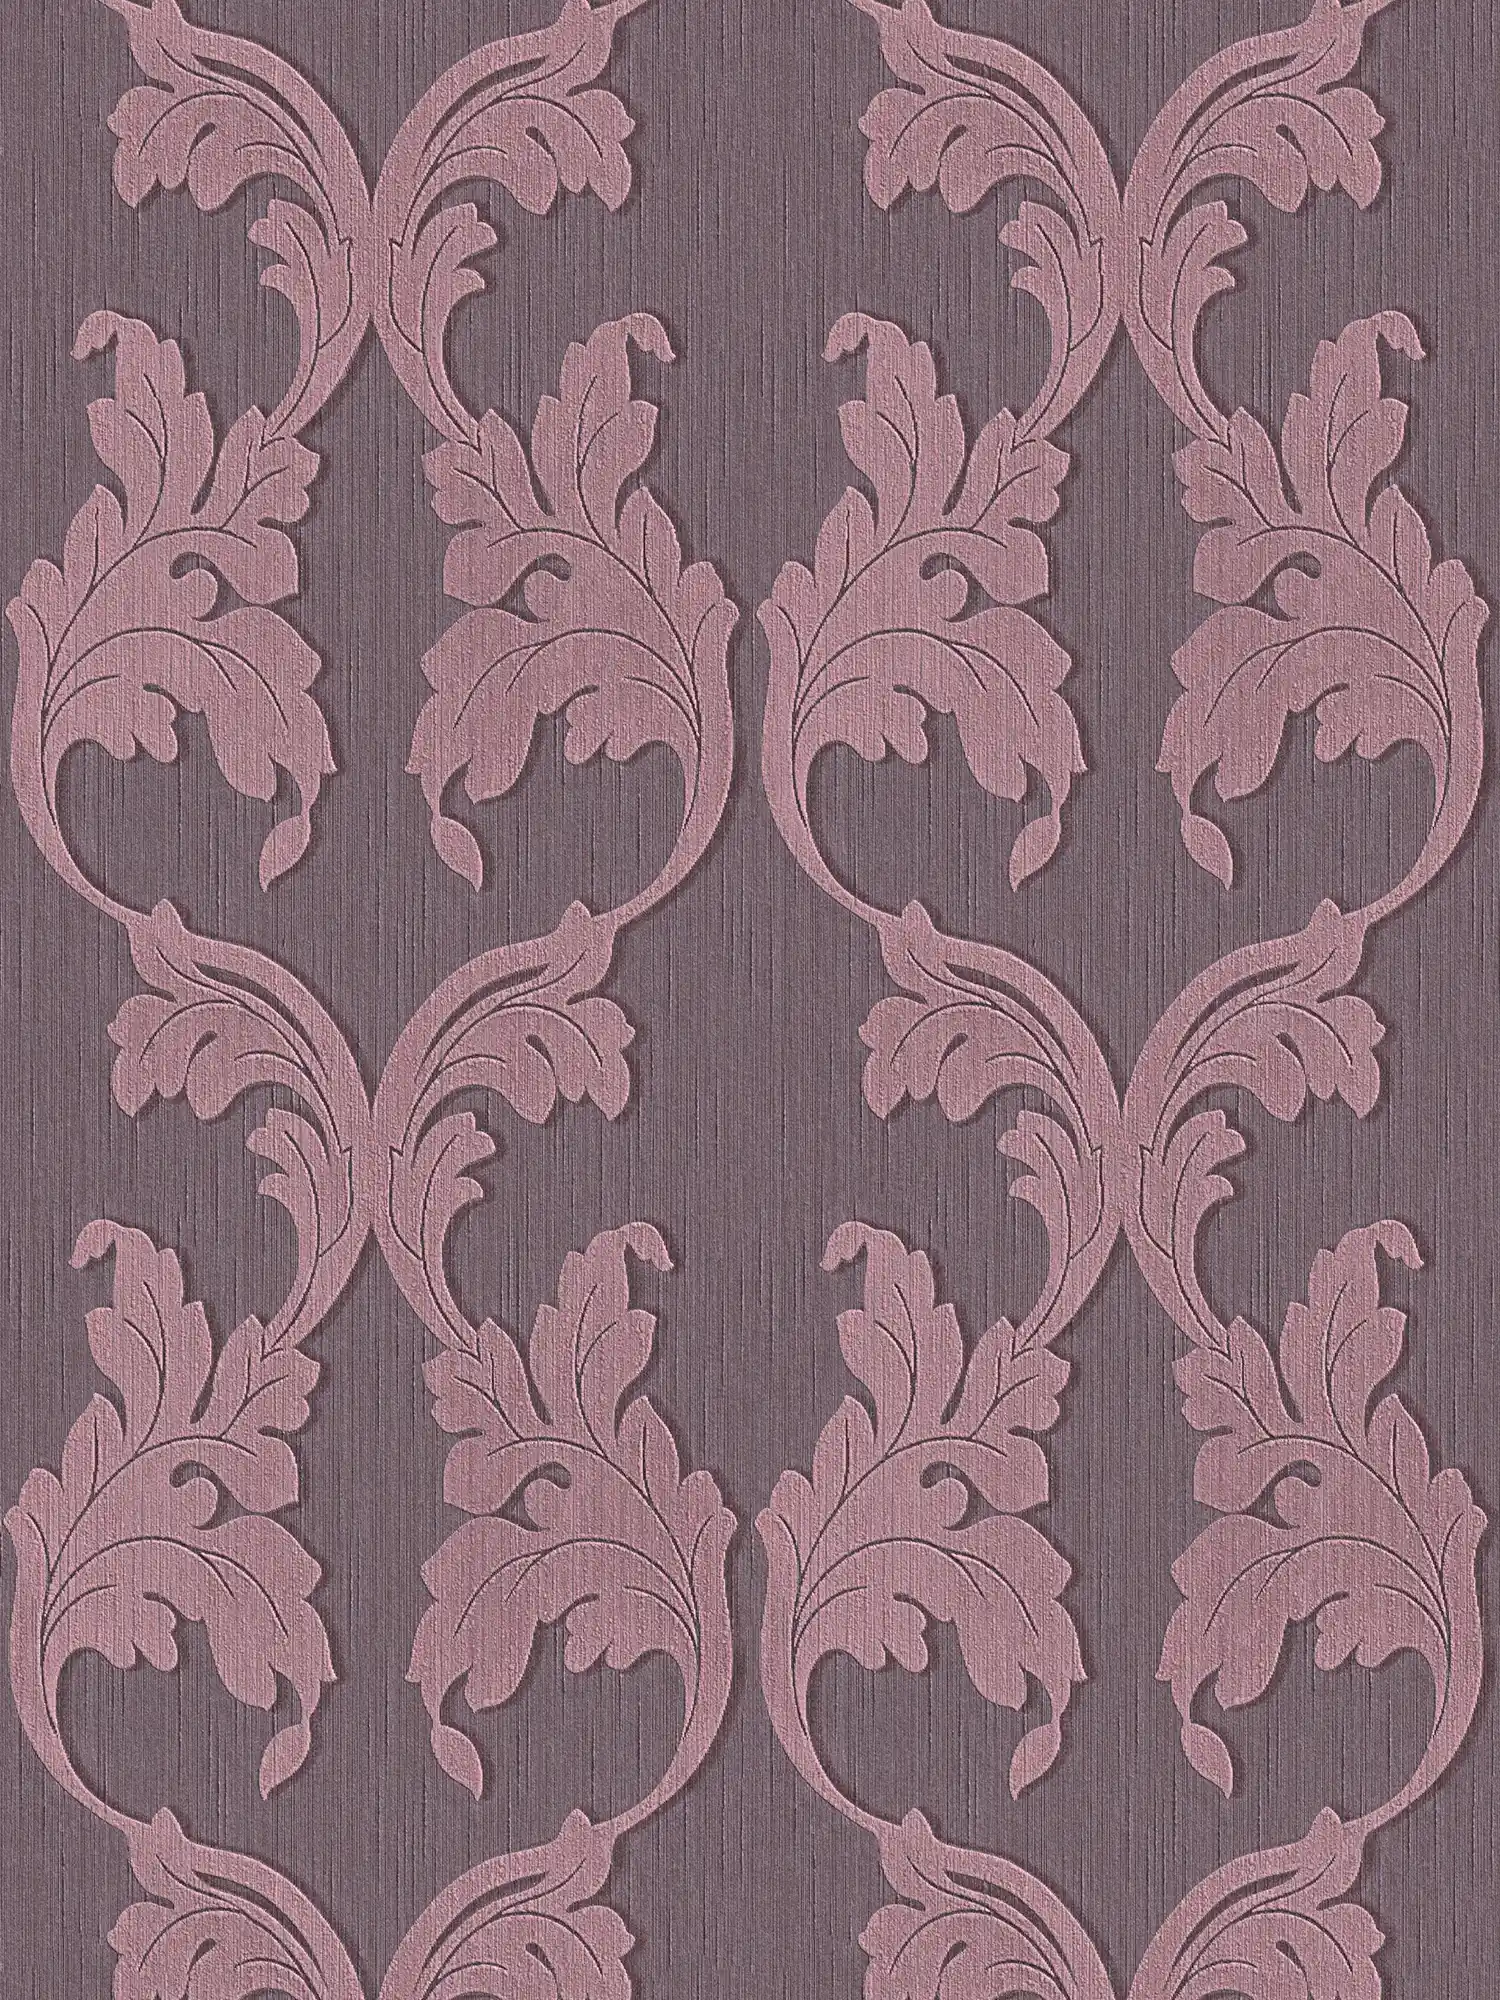 Textile wallpaper with baroque tendrils - purple
